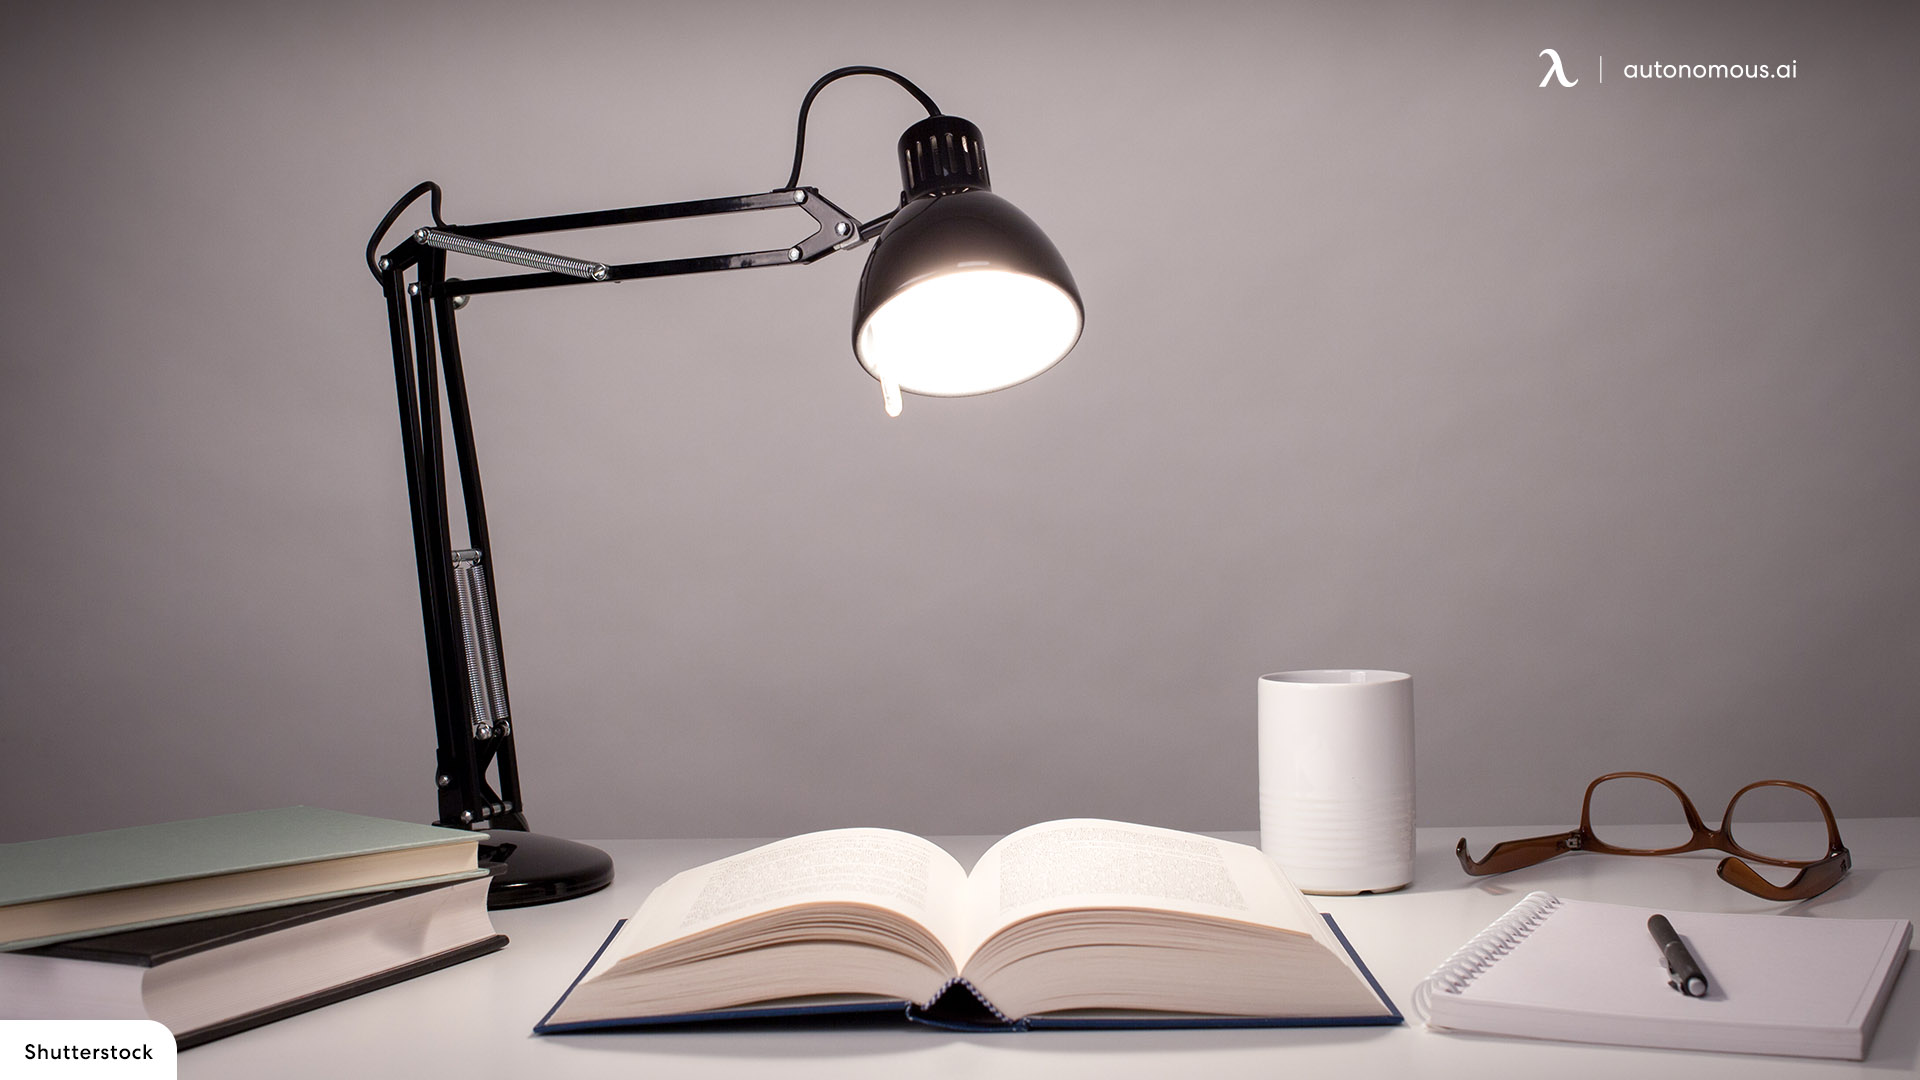 How To Choose The Best Desk Lamp For Your Home Office